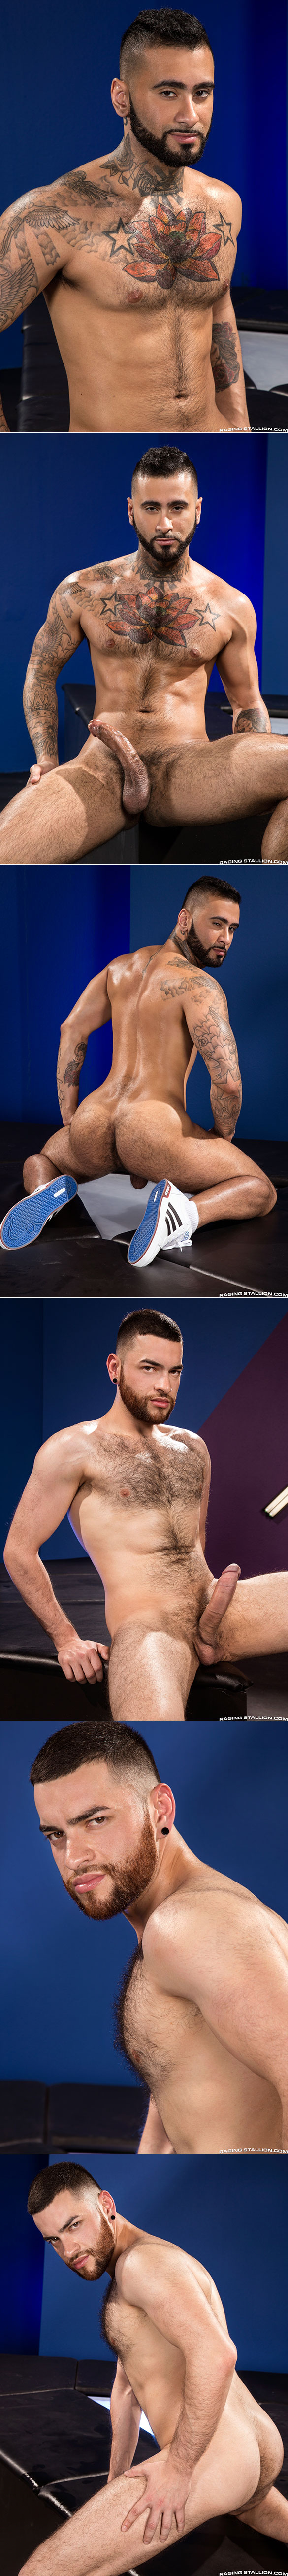 NakedSword: Raging Stallion's "Bout to Bust"